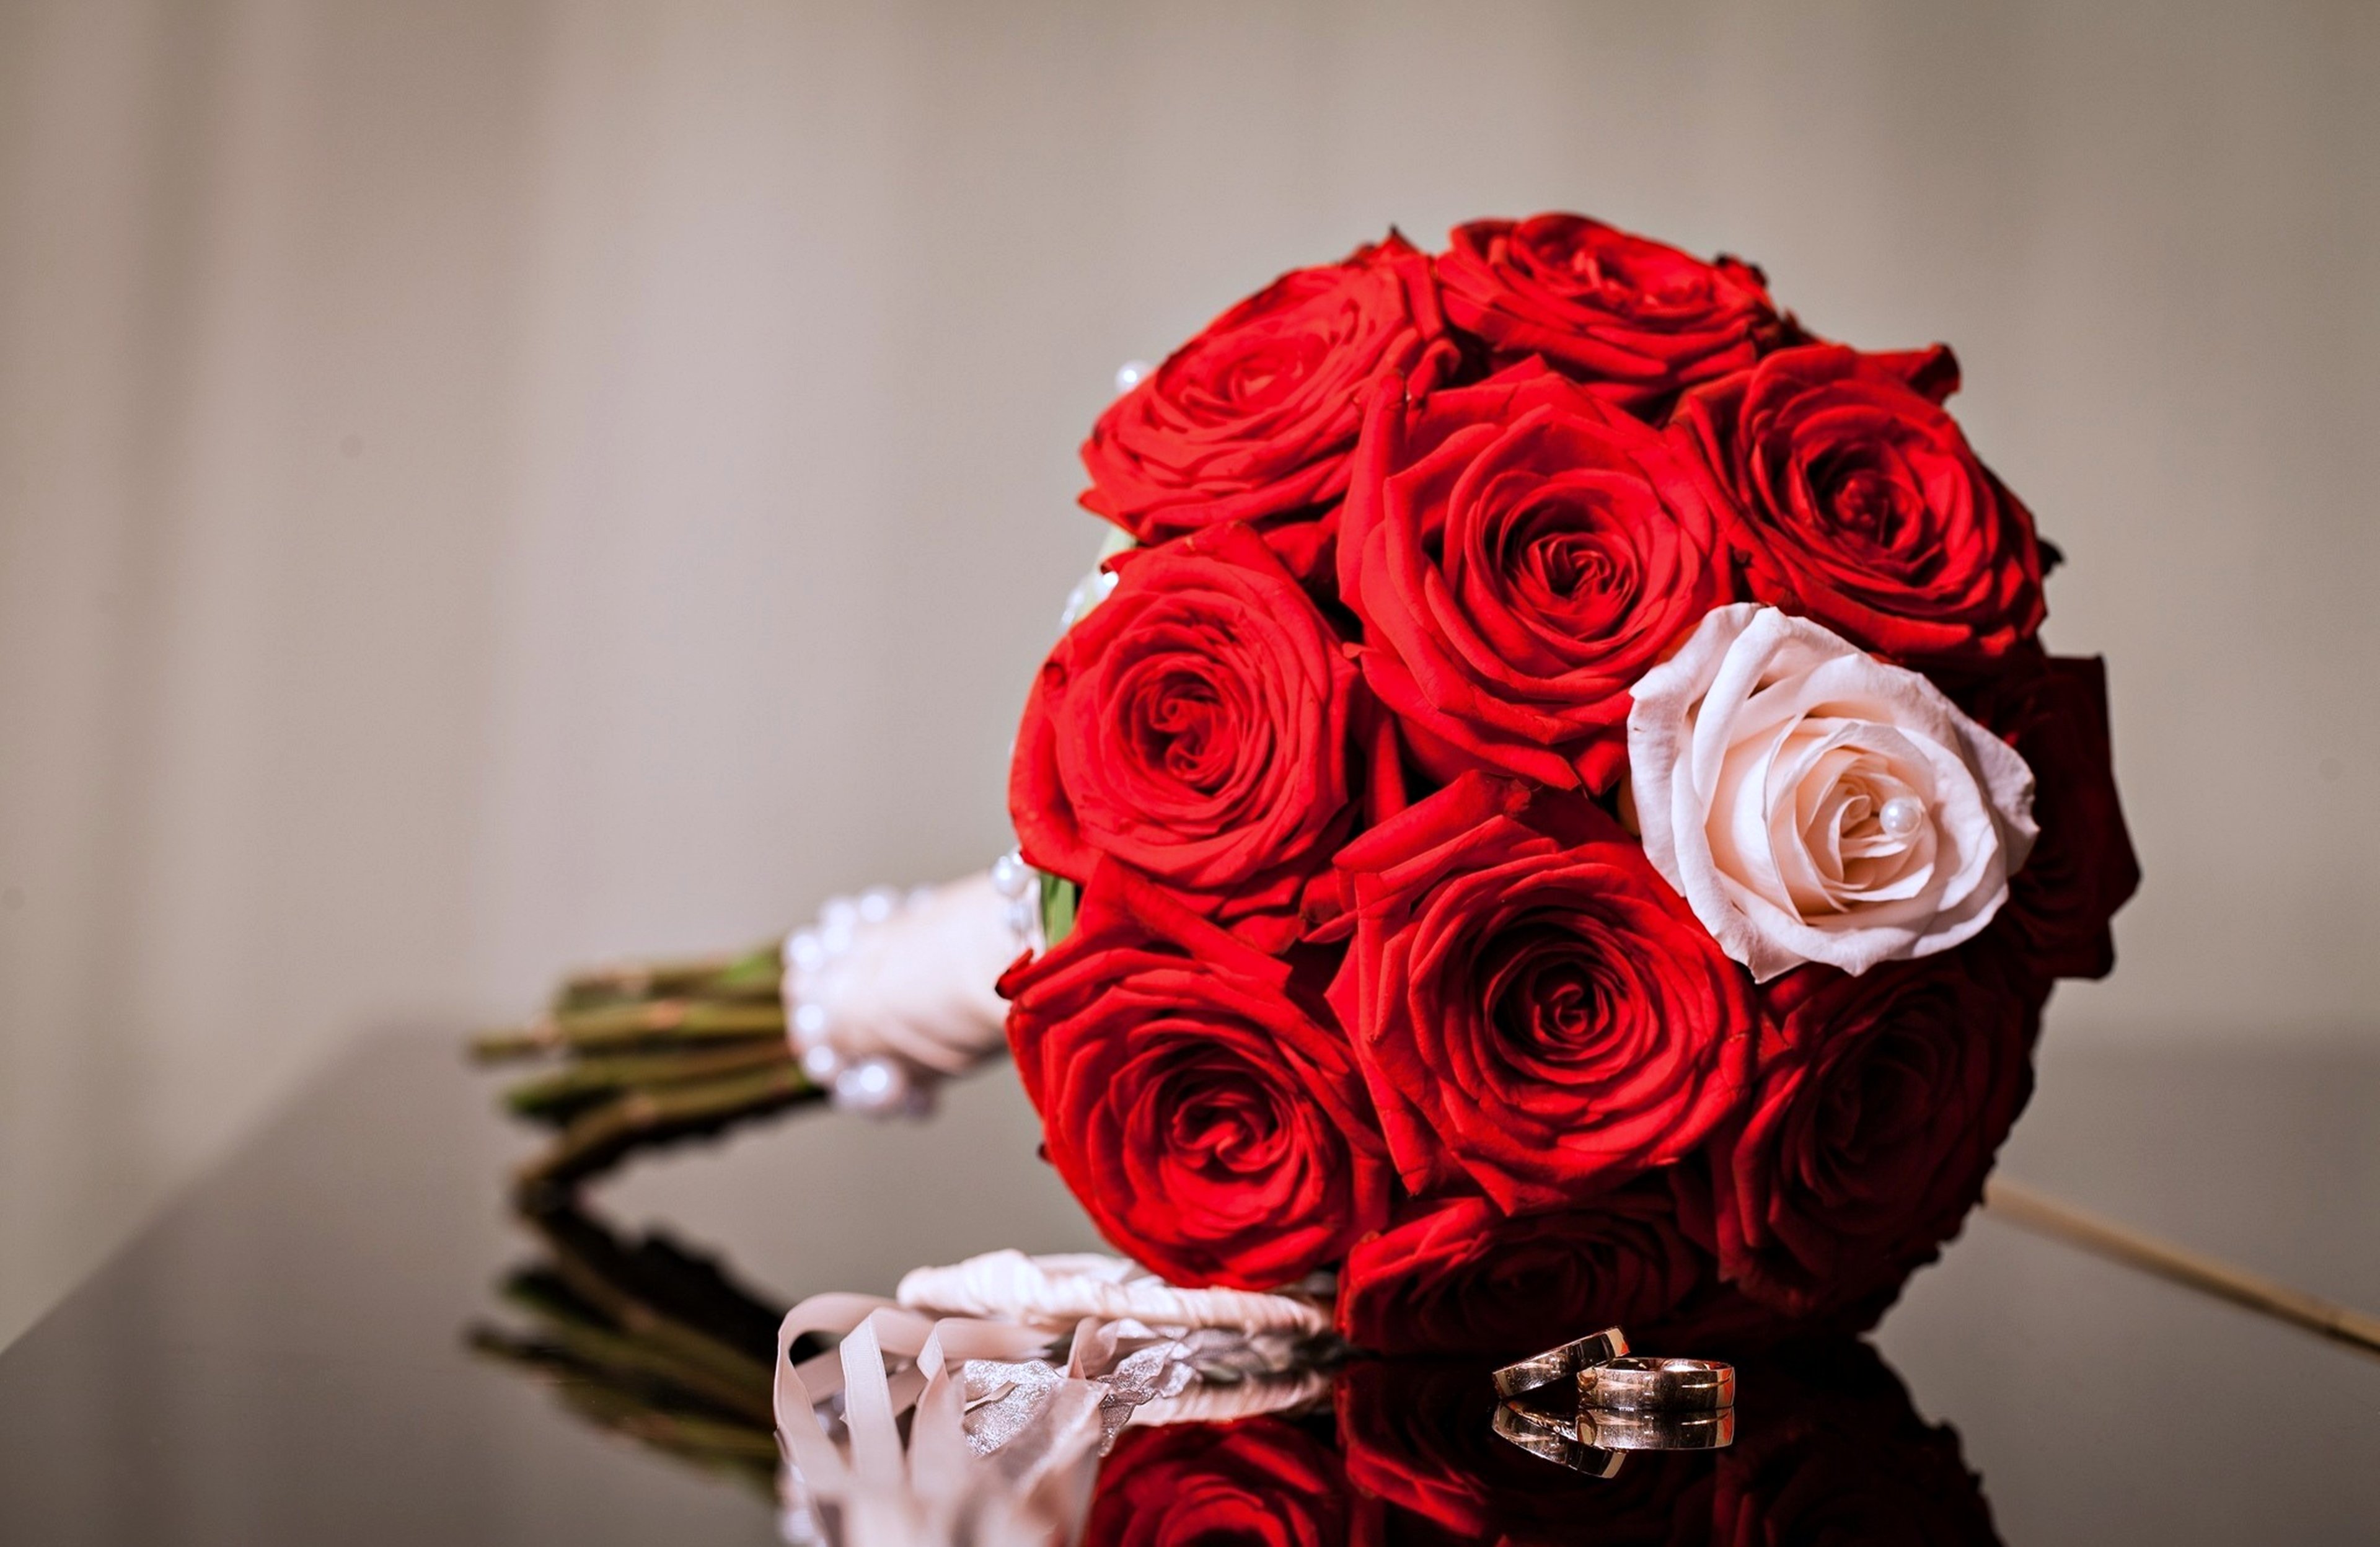 flowers, Roses, Red, Bouquet, Love, Rings, Marriage, Engagement, Romantice, Life, Happy, Emotions Wallpaper